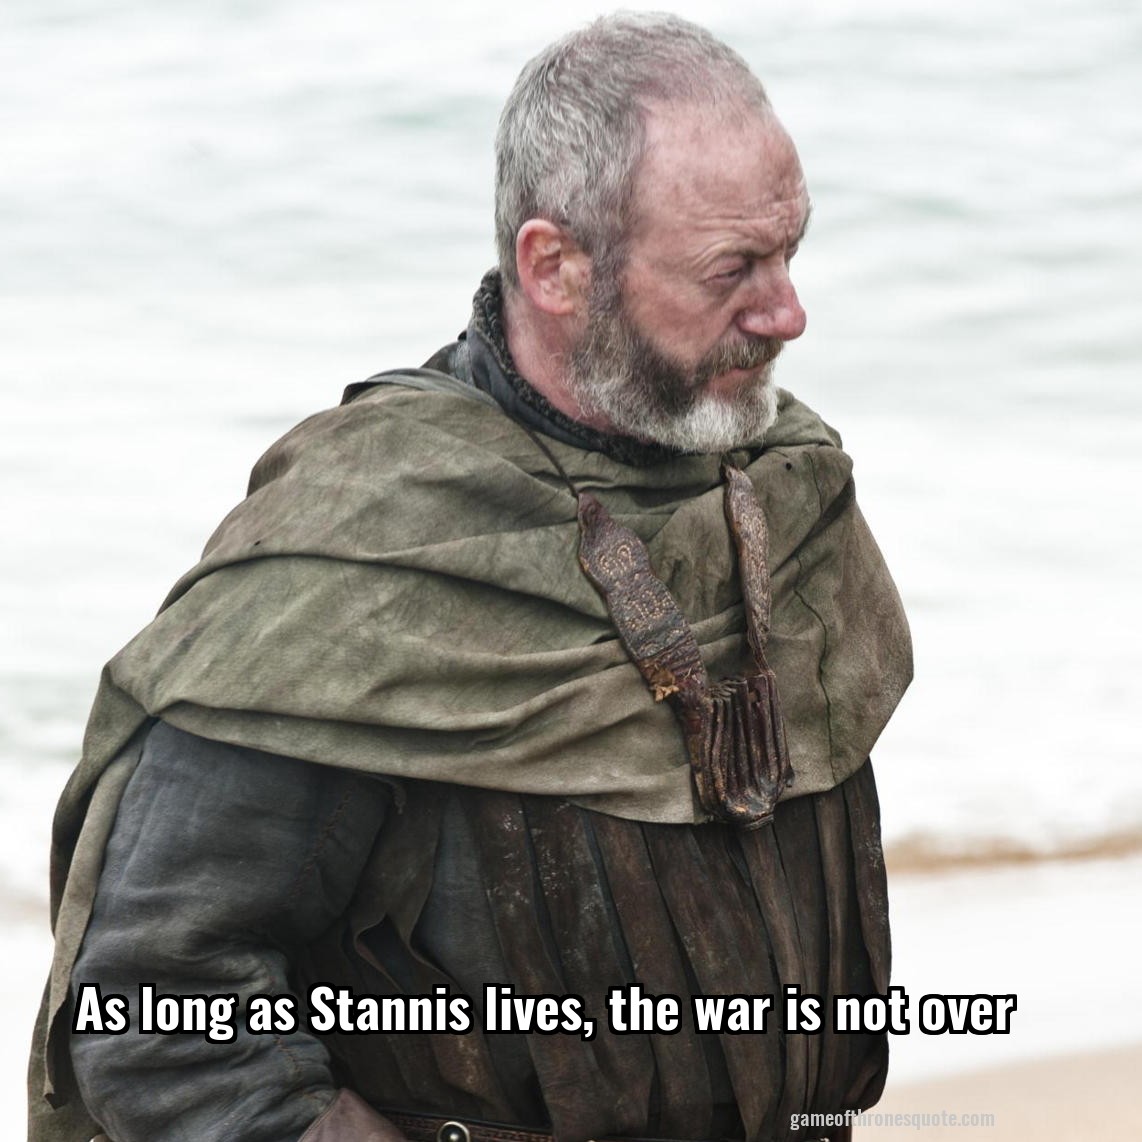 As long as Stannis lives, the war is not over